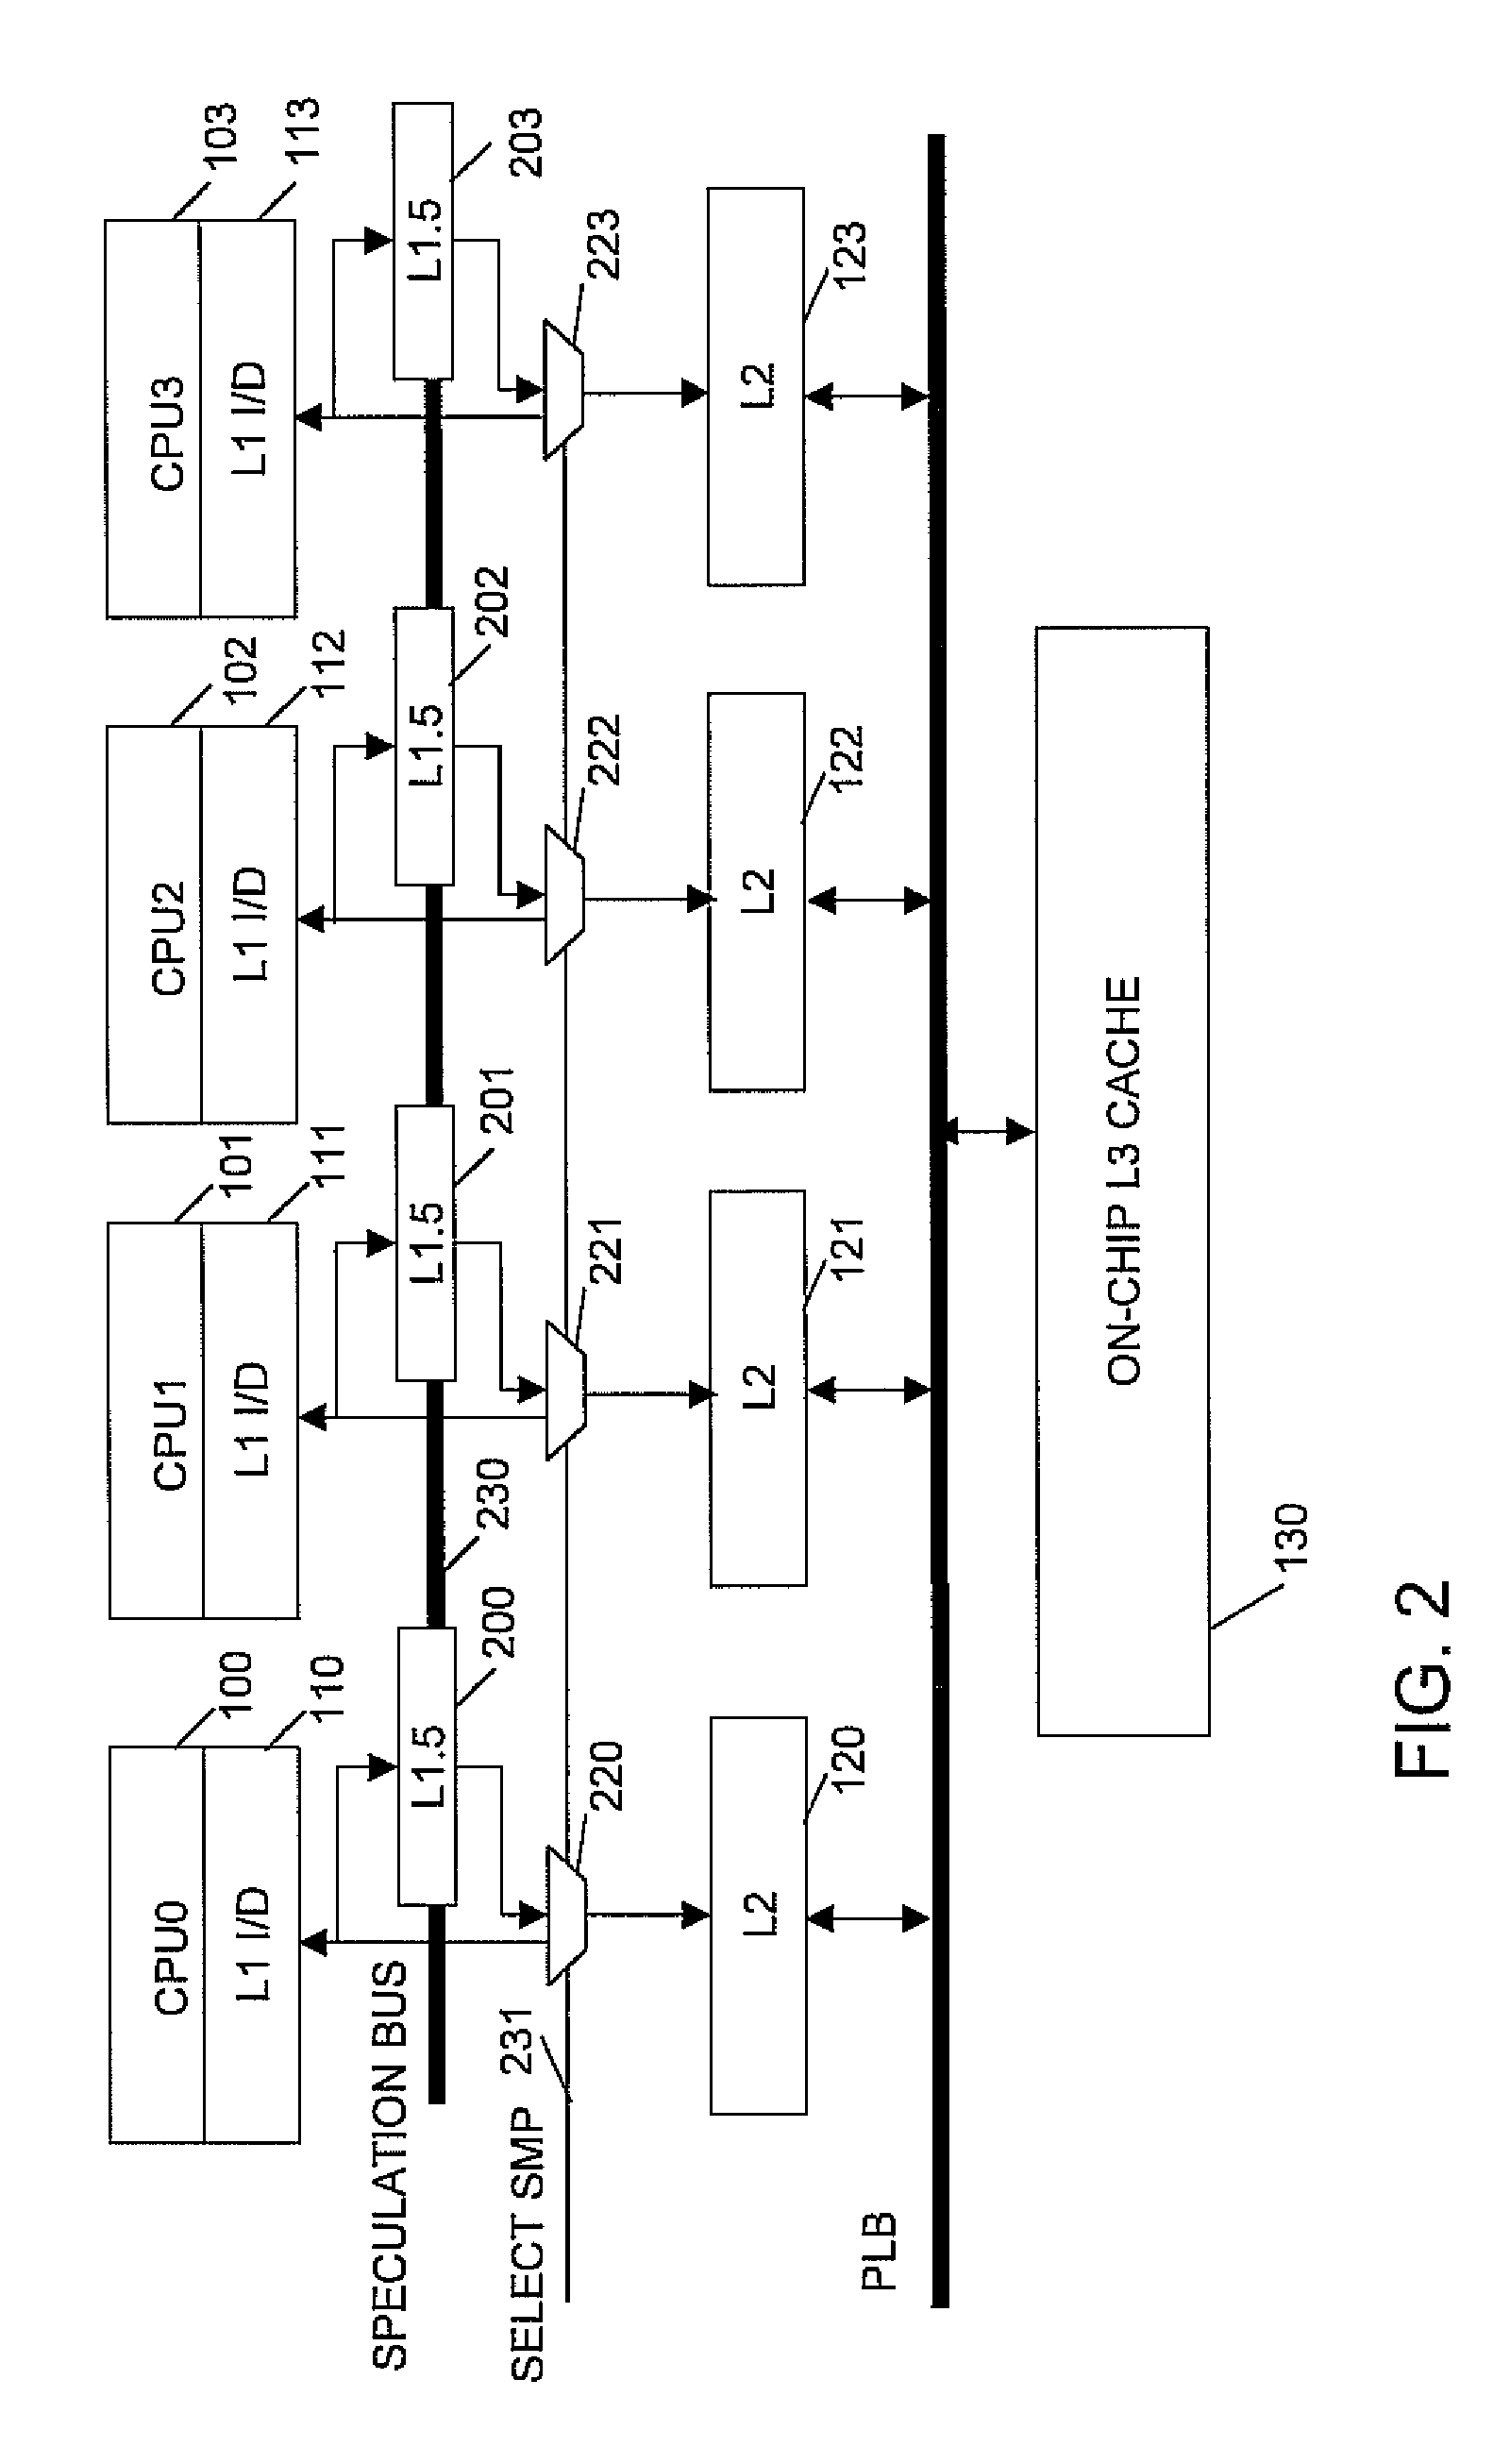 Low complexity speculative multithreading system based on unmodified microprocessor core